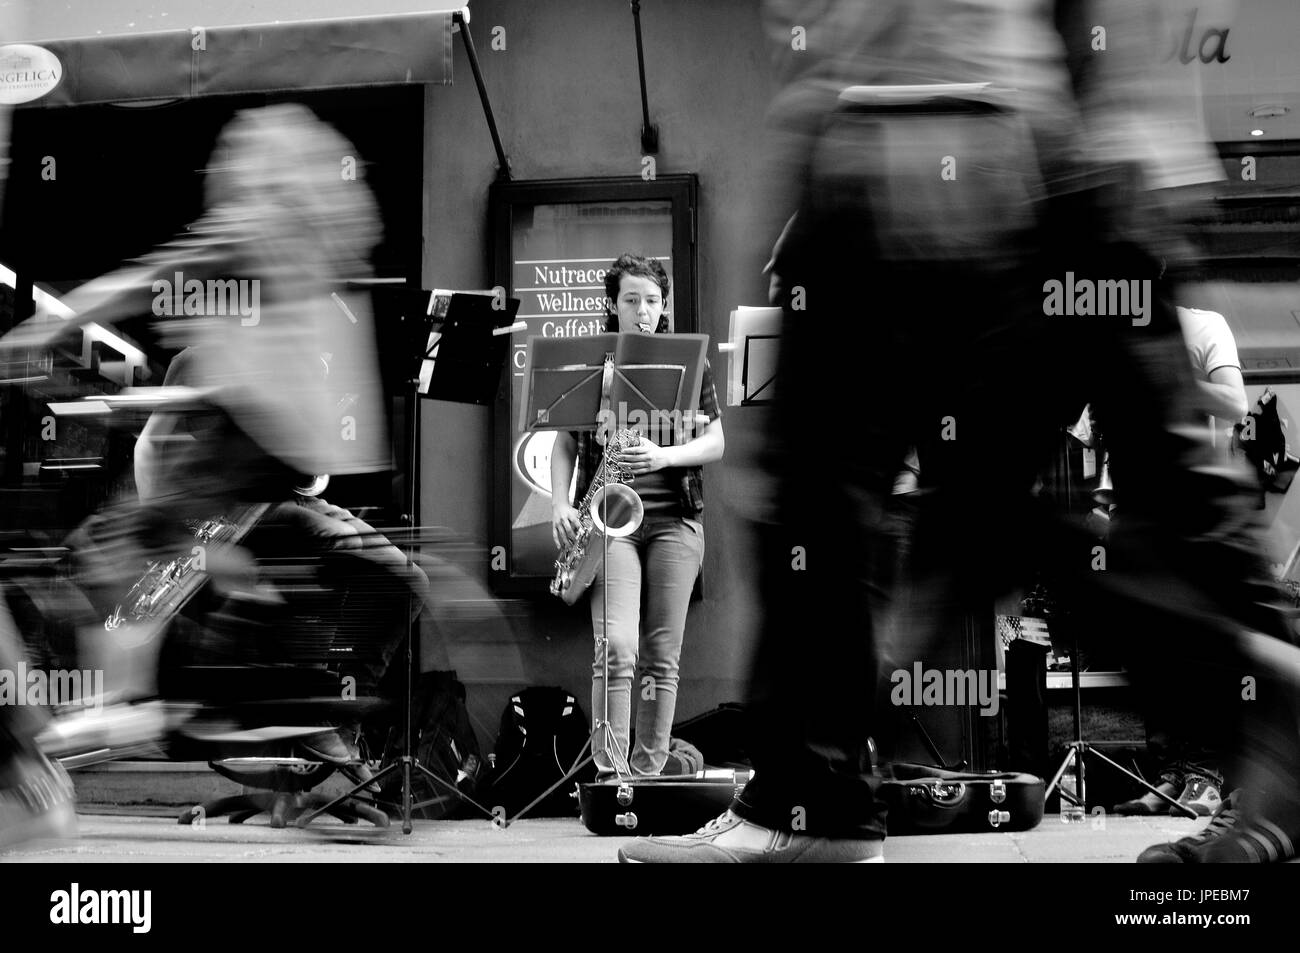 Bologna street photography. Musicians perform on the street in front of public on the move. Stock Photo